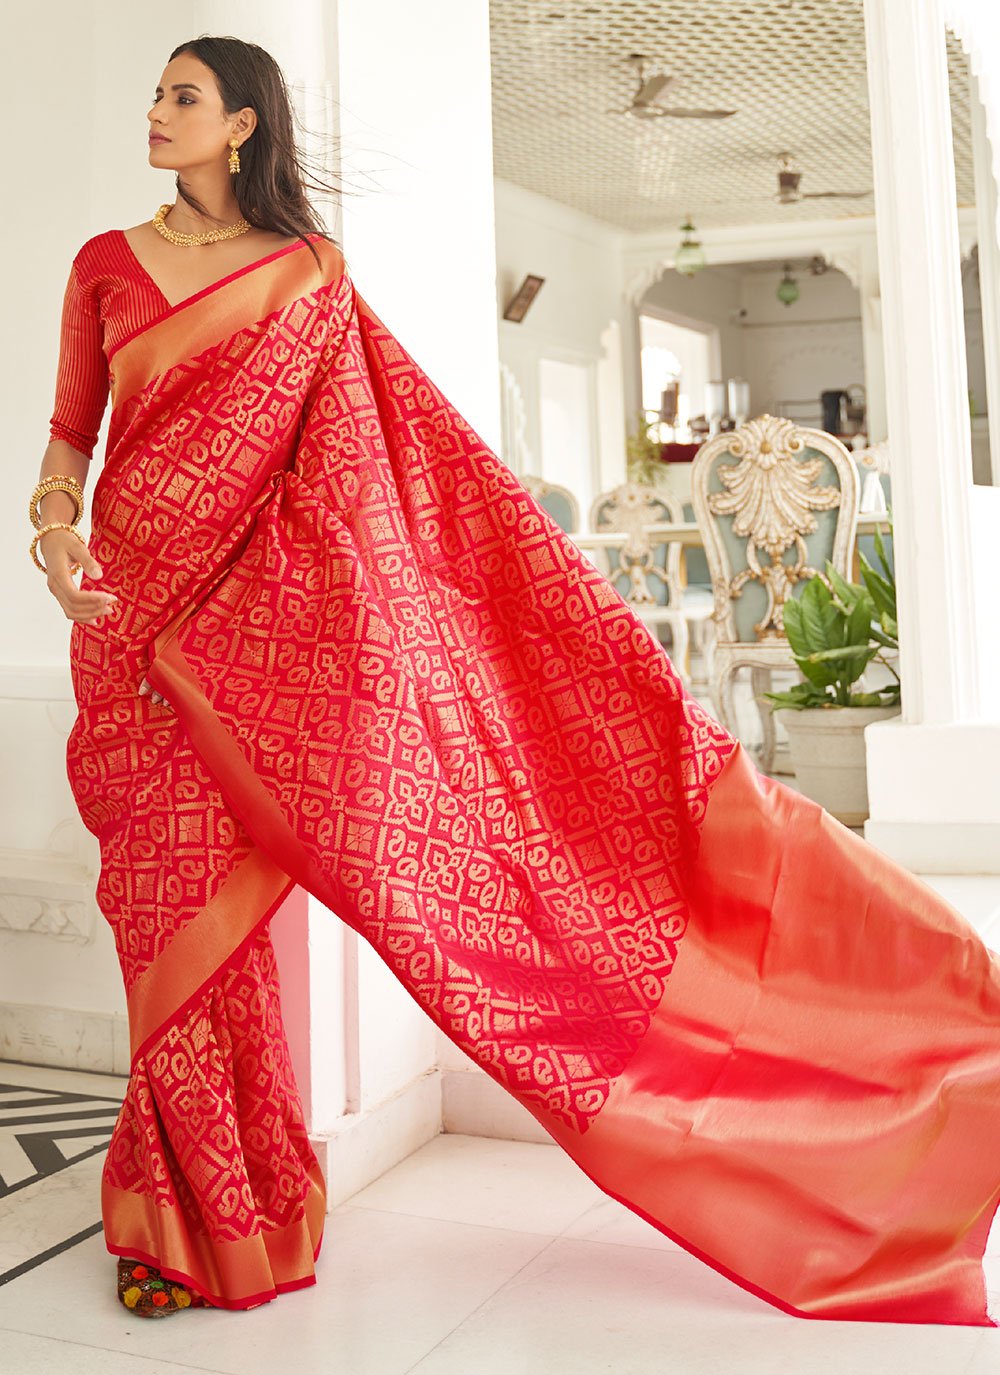 Handloom Silk Bollywood Saree in Red Enhanced with Woven